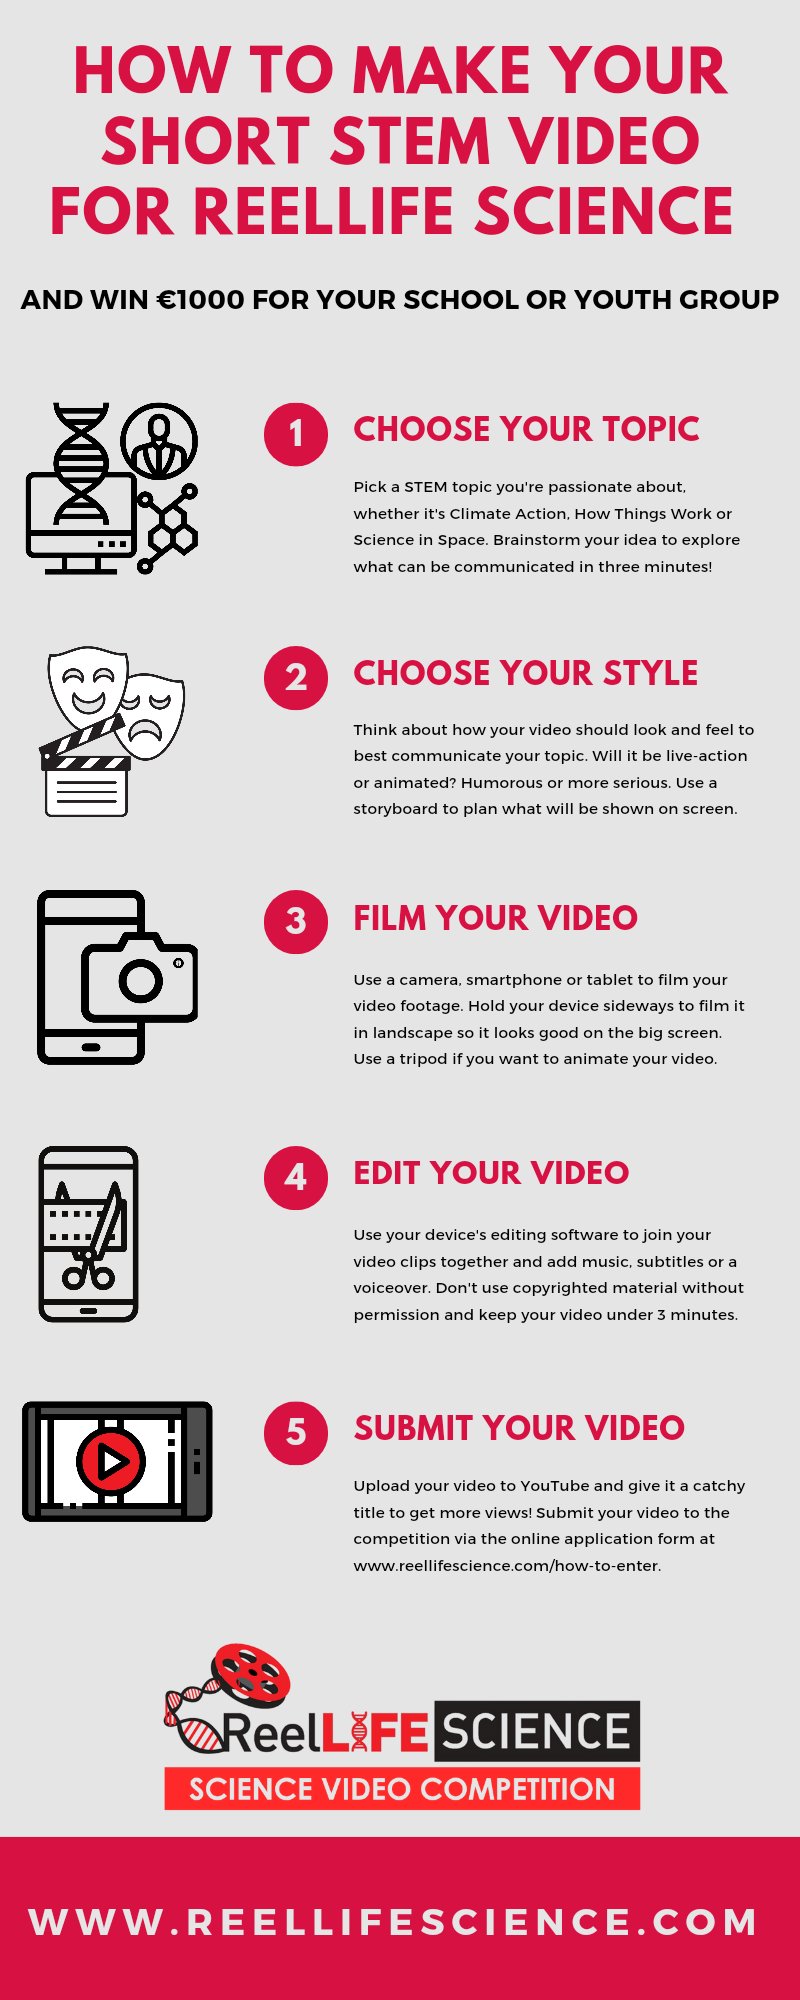 ReelLIFE SCIENCE on X: Need some help with your video? ReelLIFE